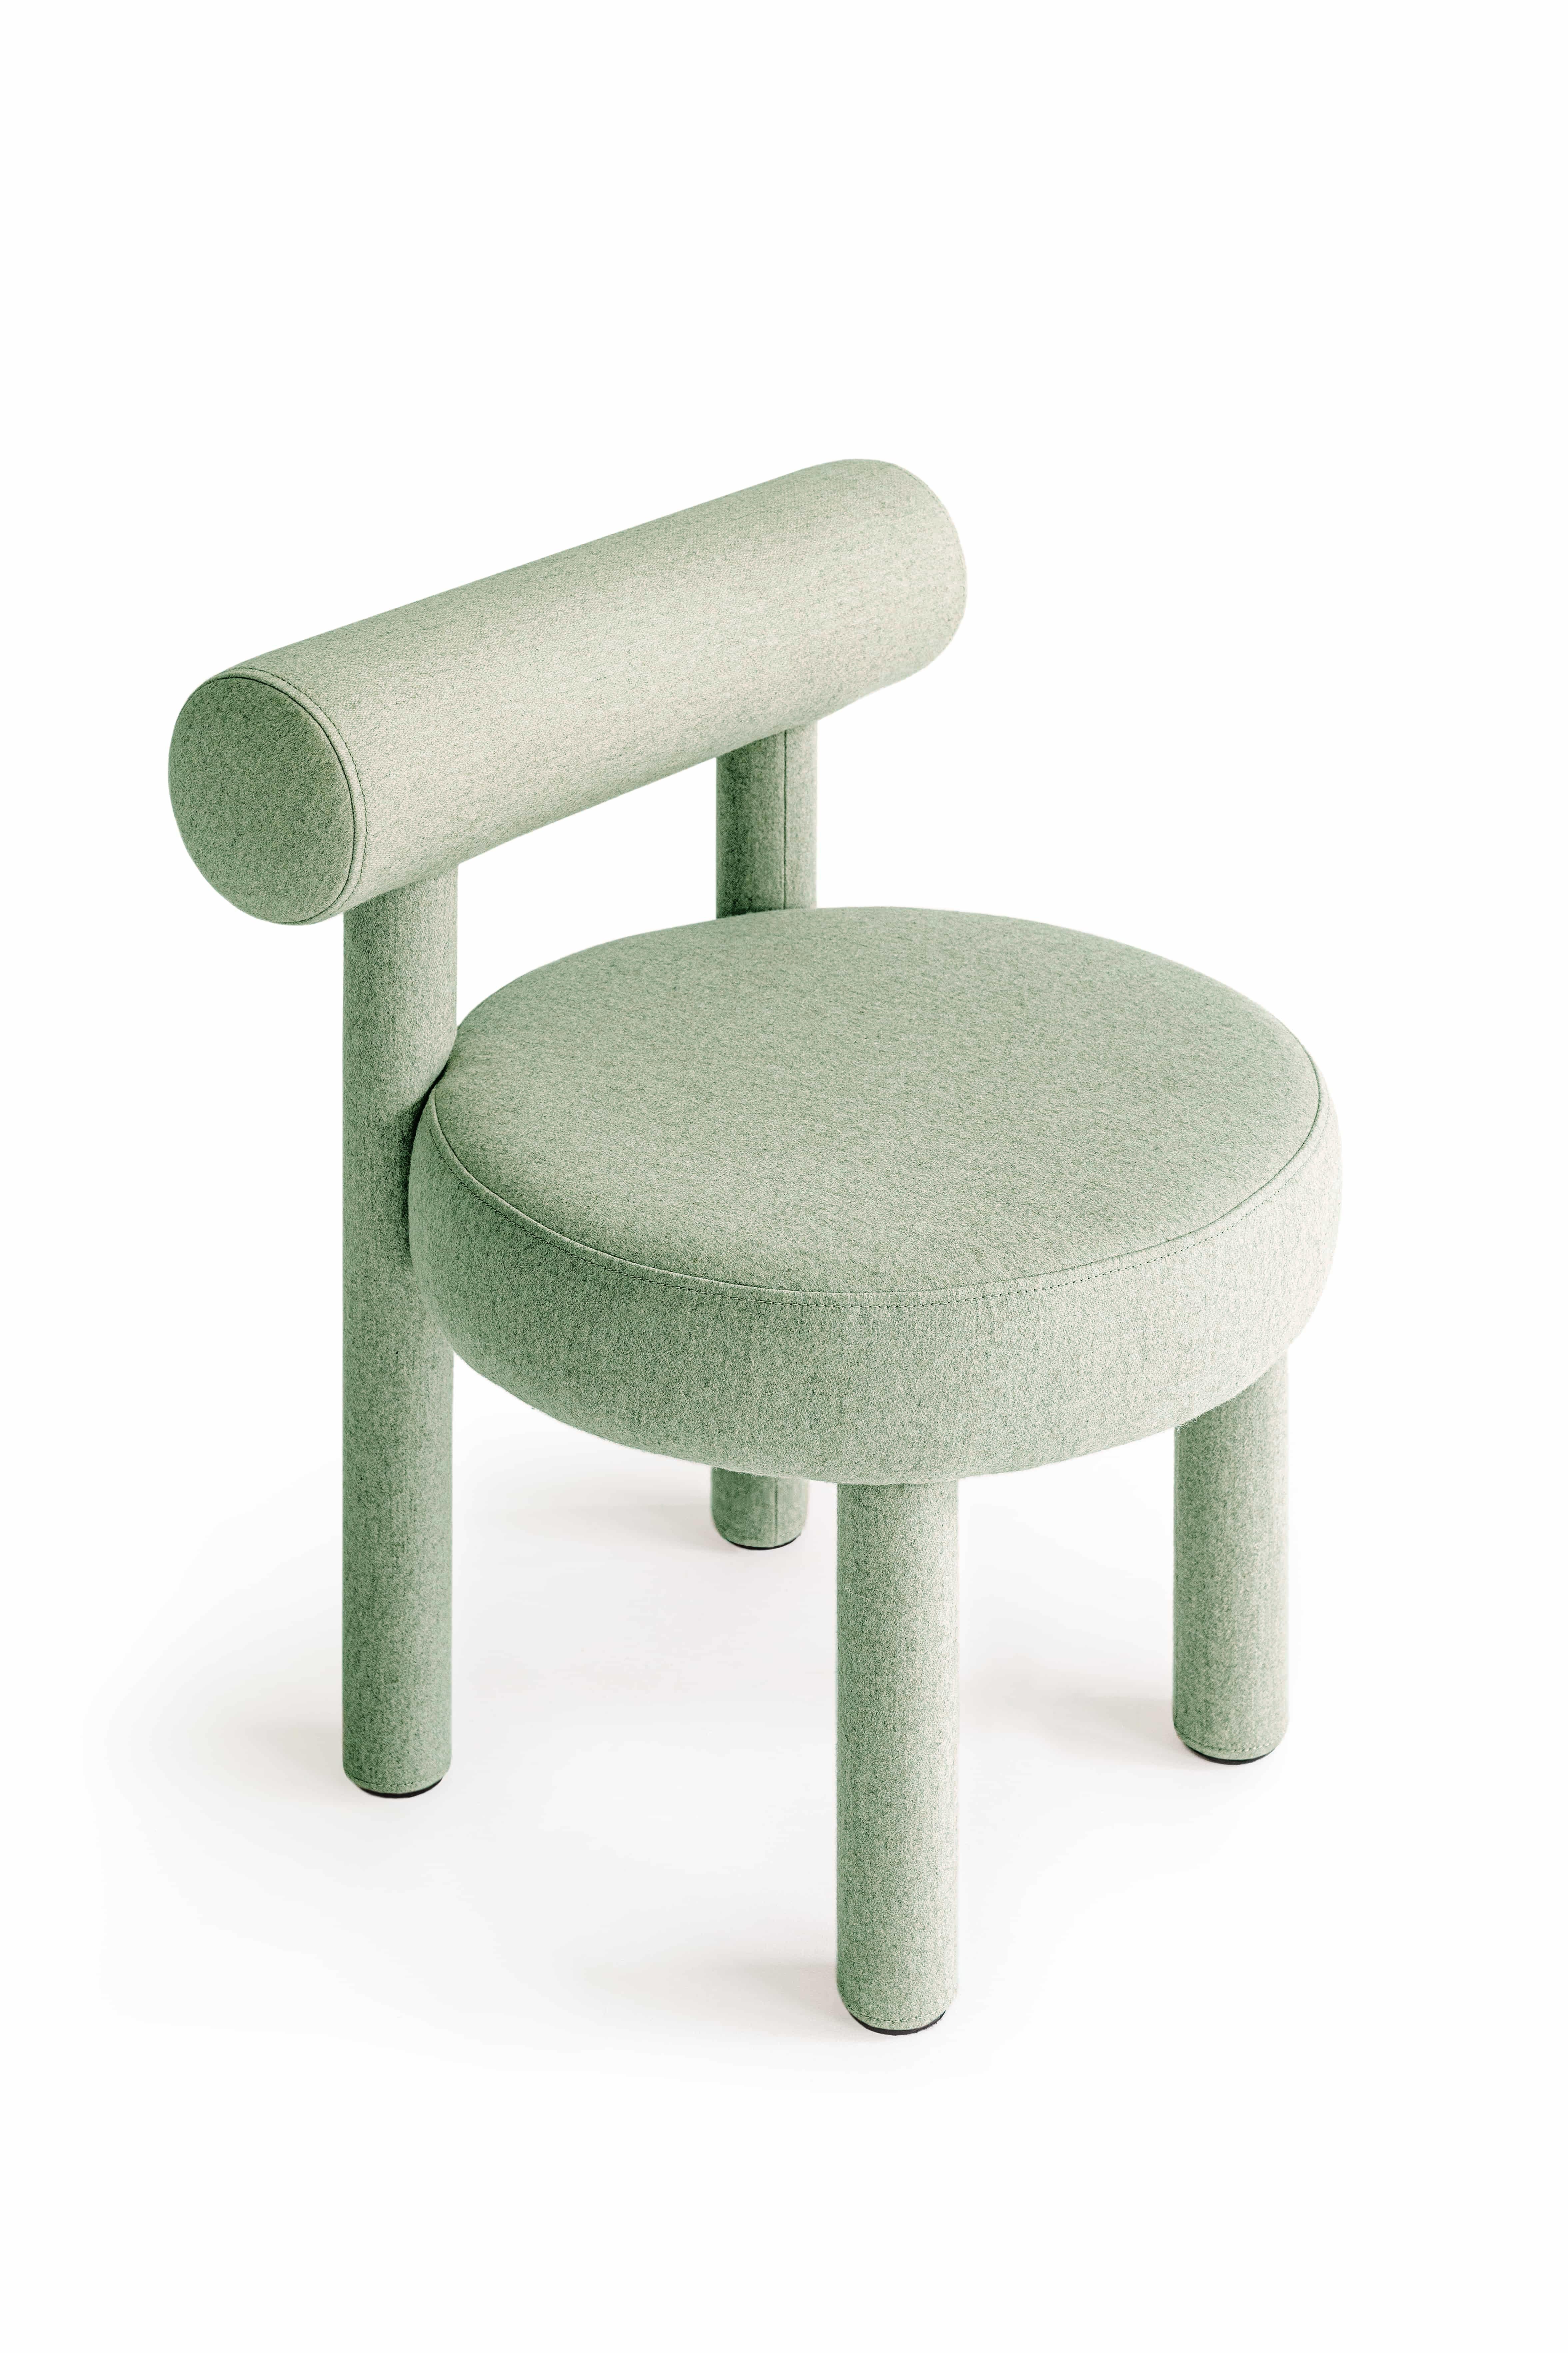 Chair Gropius CS1
Designer: Kateryna Sokolova

Model in the main picture Collection: Wool, Color: Jade 42

Dimensions:
Height: 74 cm / 29,13 in
Width: 57 cm / 22,44 in
Depth: 57 cm / 22,44 in
Seat height: 47 cm / 18,11 in

New NOOM furniture